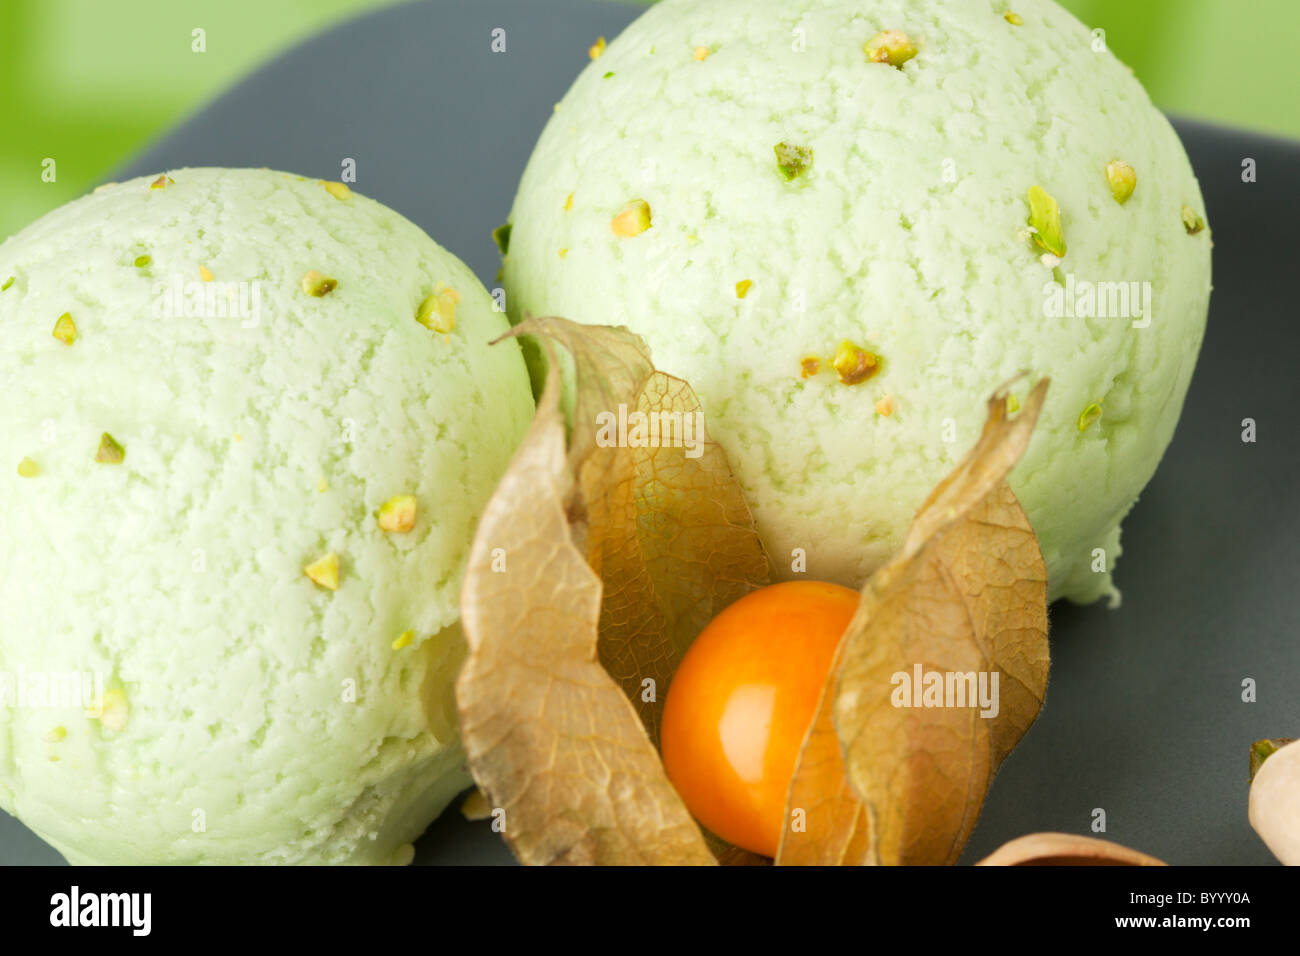 two scoops of pistachio ice cream and a winter cherry fruit Stock Photo